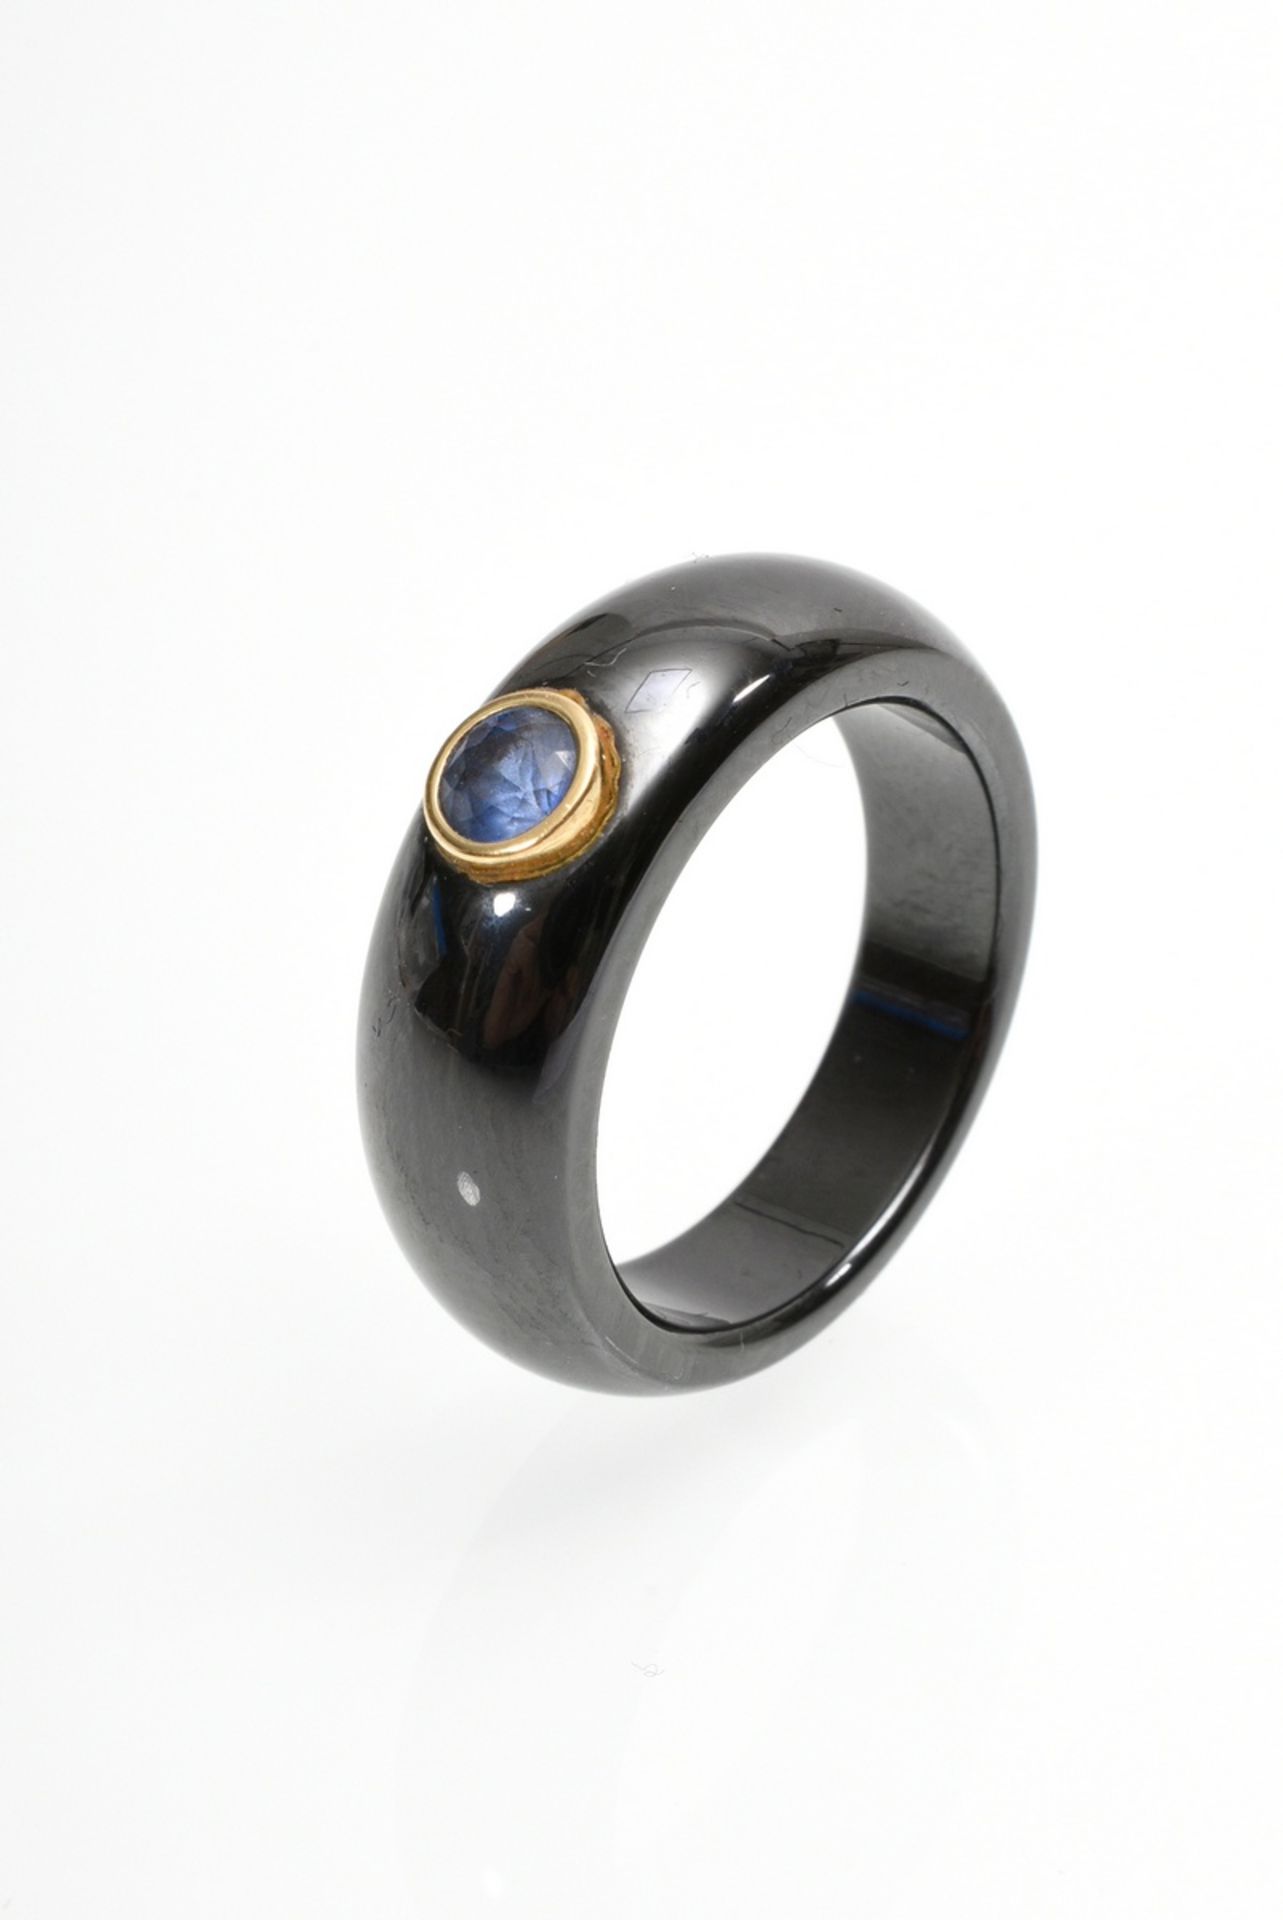 Carbon ring with polished surface and set sapphire in yellow gold 750 bezel setting, 6g, size 54